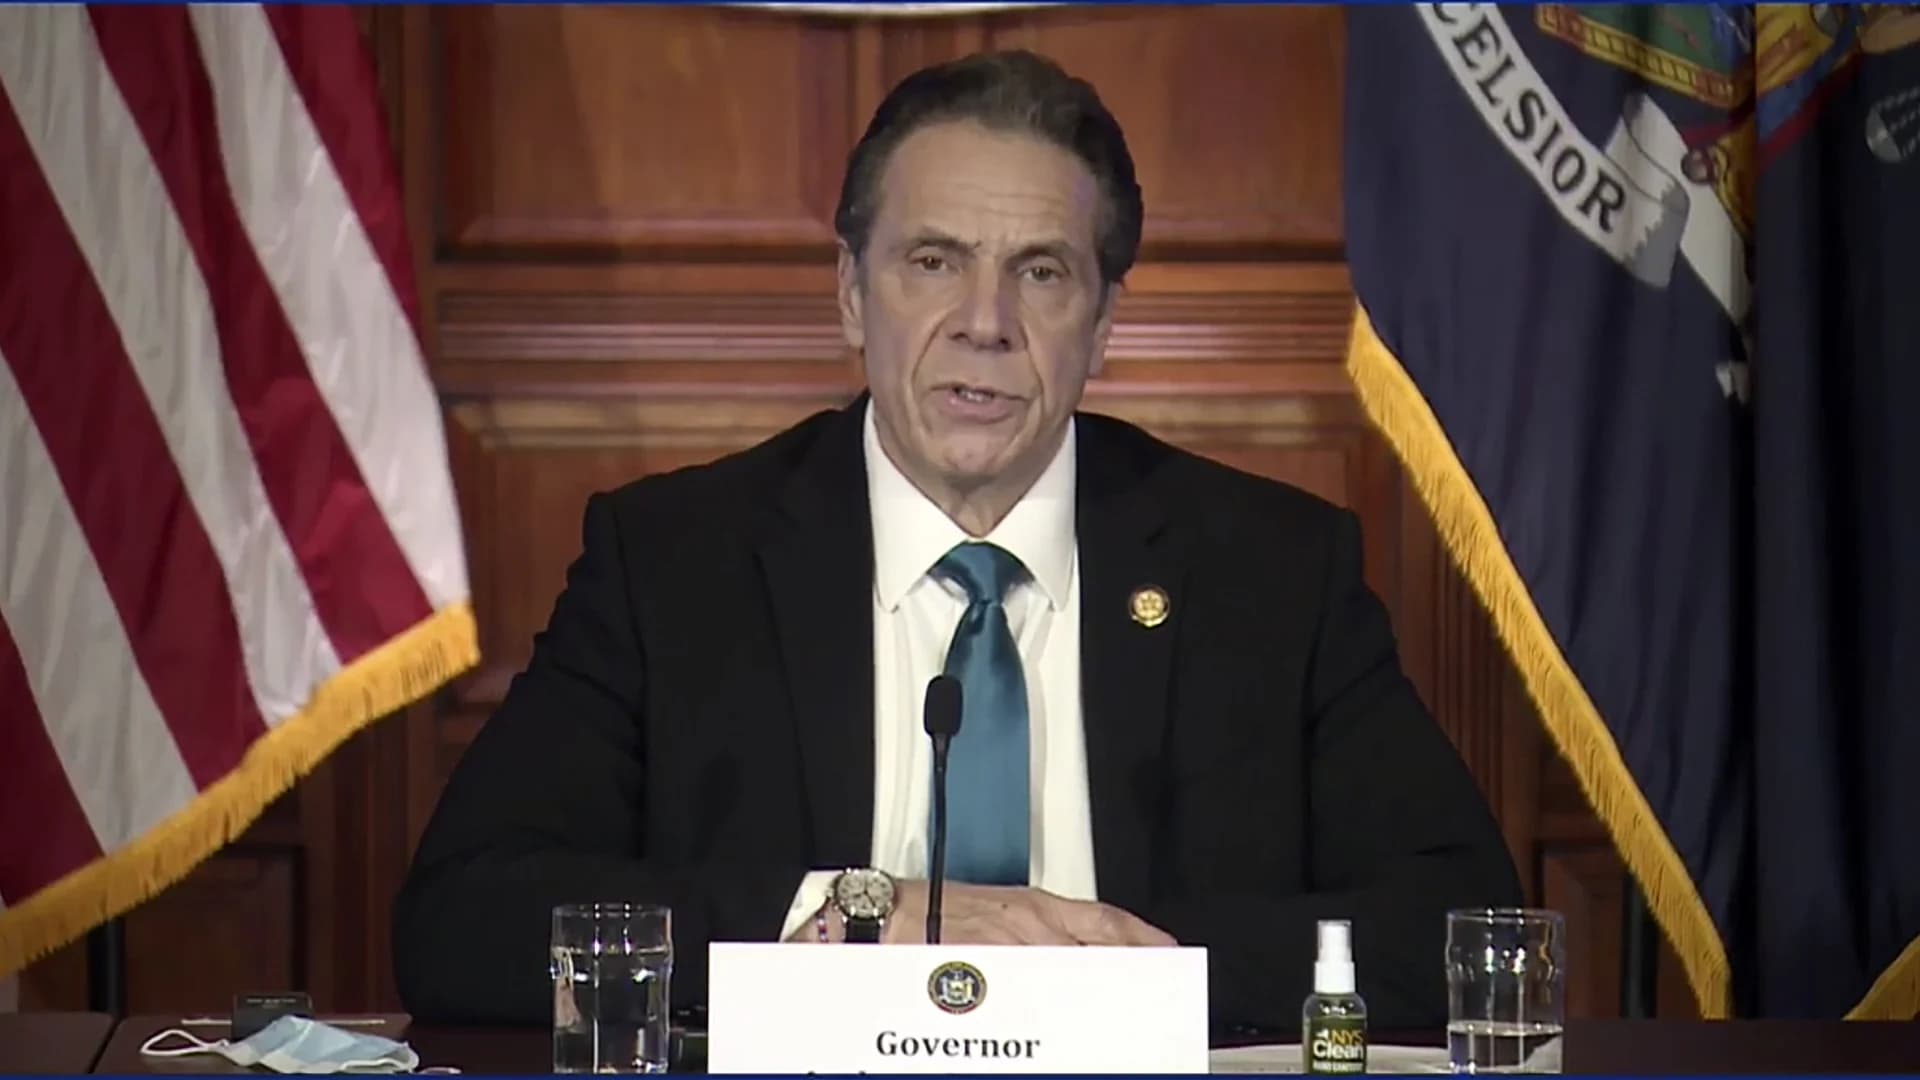 How Cuomo investigation, possible impeachment could play out